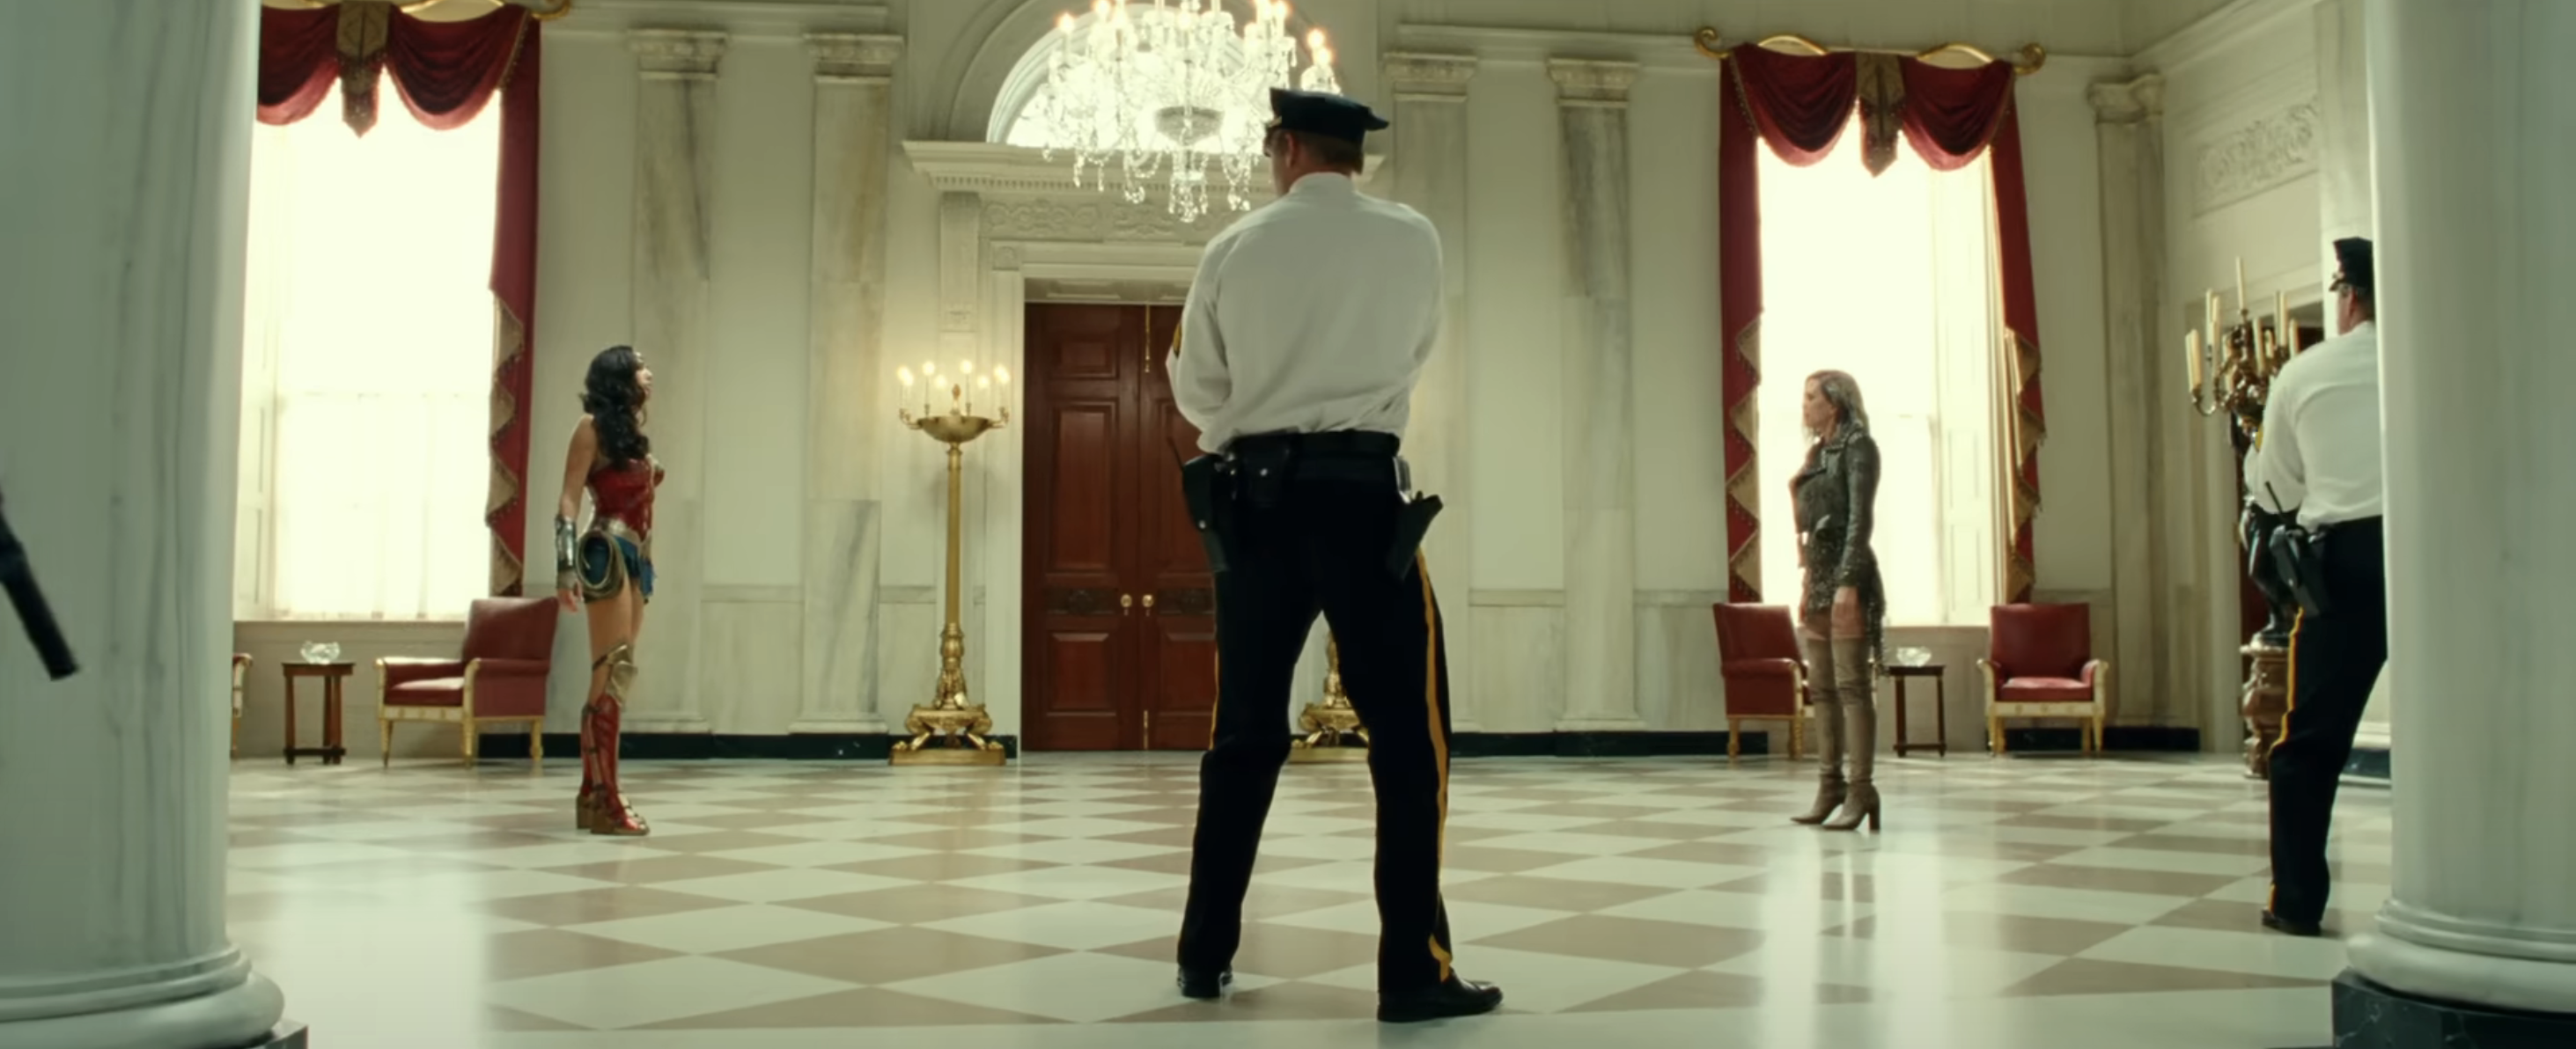 Wonder Woman stands in a poised stance facing Cheetah in an opulent room, a policeman observes